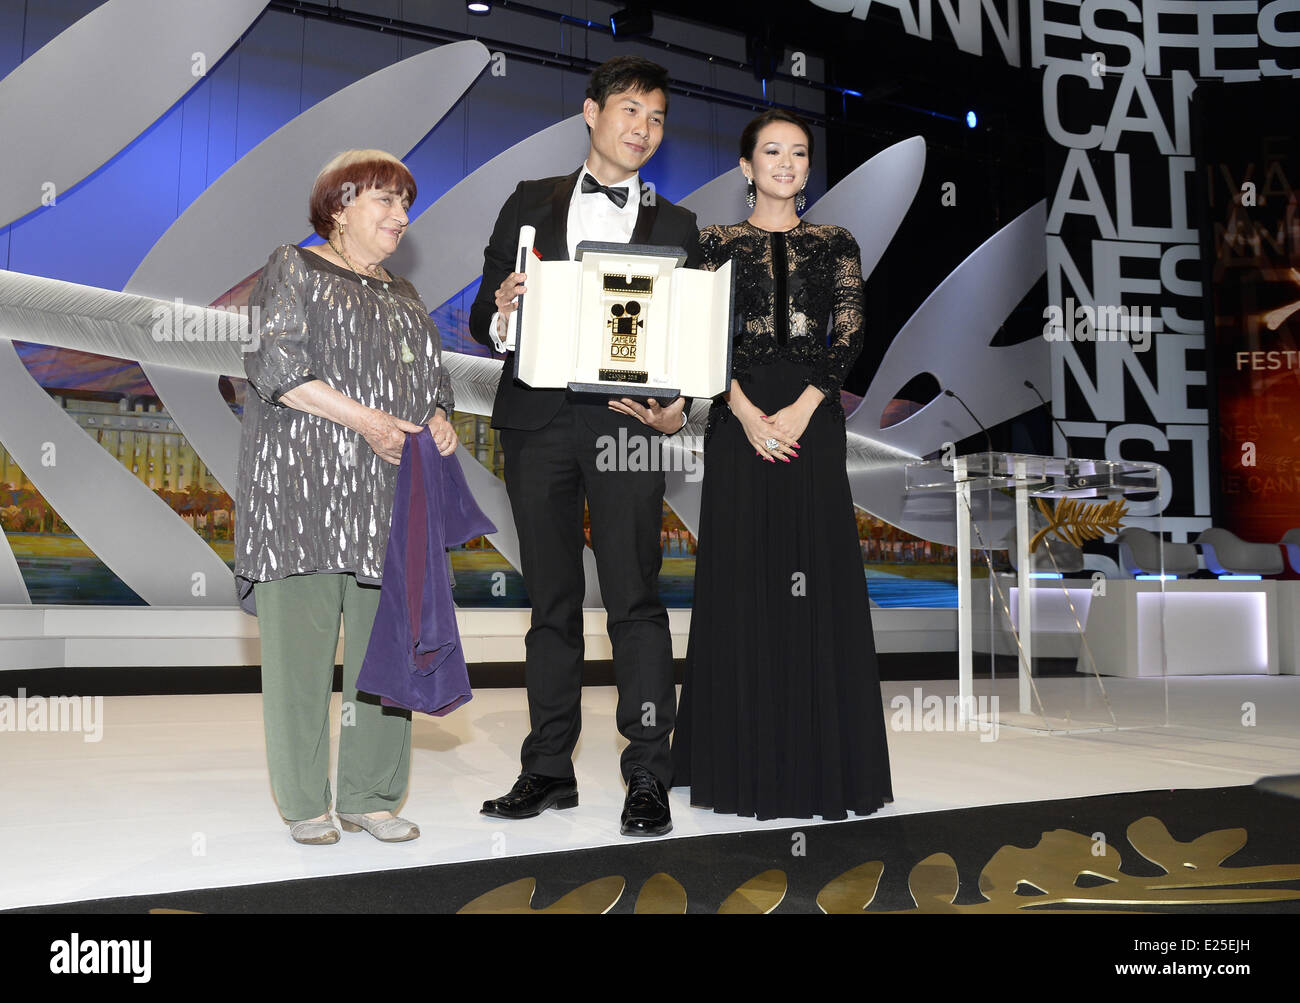 Singaporean director Anthony Chen (C) speaks on stage  surrounded by French director and President of the Camera d'Or Jury Agnes Varda (L) and Chinese actress and member of the Un Certain Regard Jury Zhang Ziyi (R) after winning the Camera d'Or for Best First Film at the 66th Cannes film festival in Cannes.  Featuring: Agnes Varda,Anthony Chen,Zhang Ziyi Where: Cannes, France When: 26 May 2013 Stock Photo